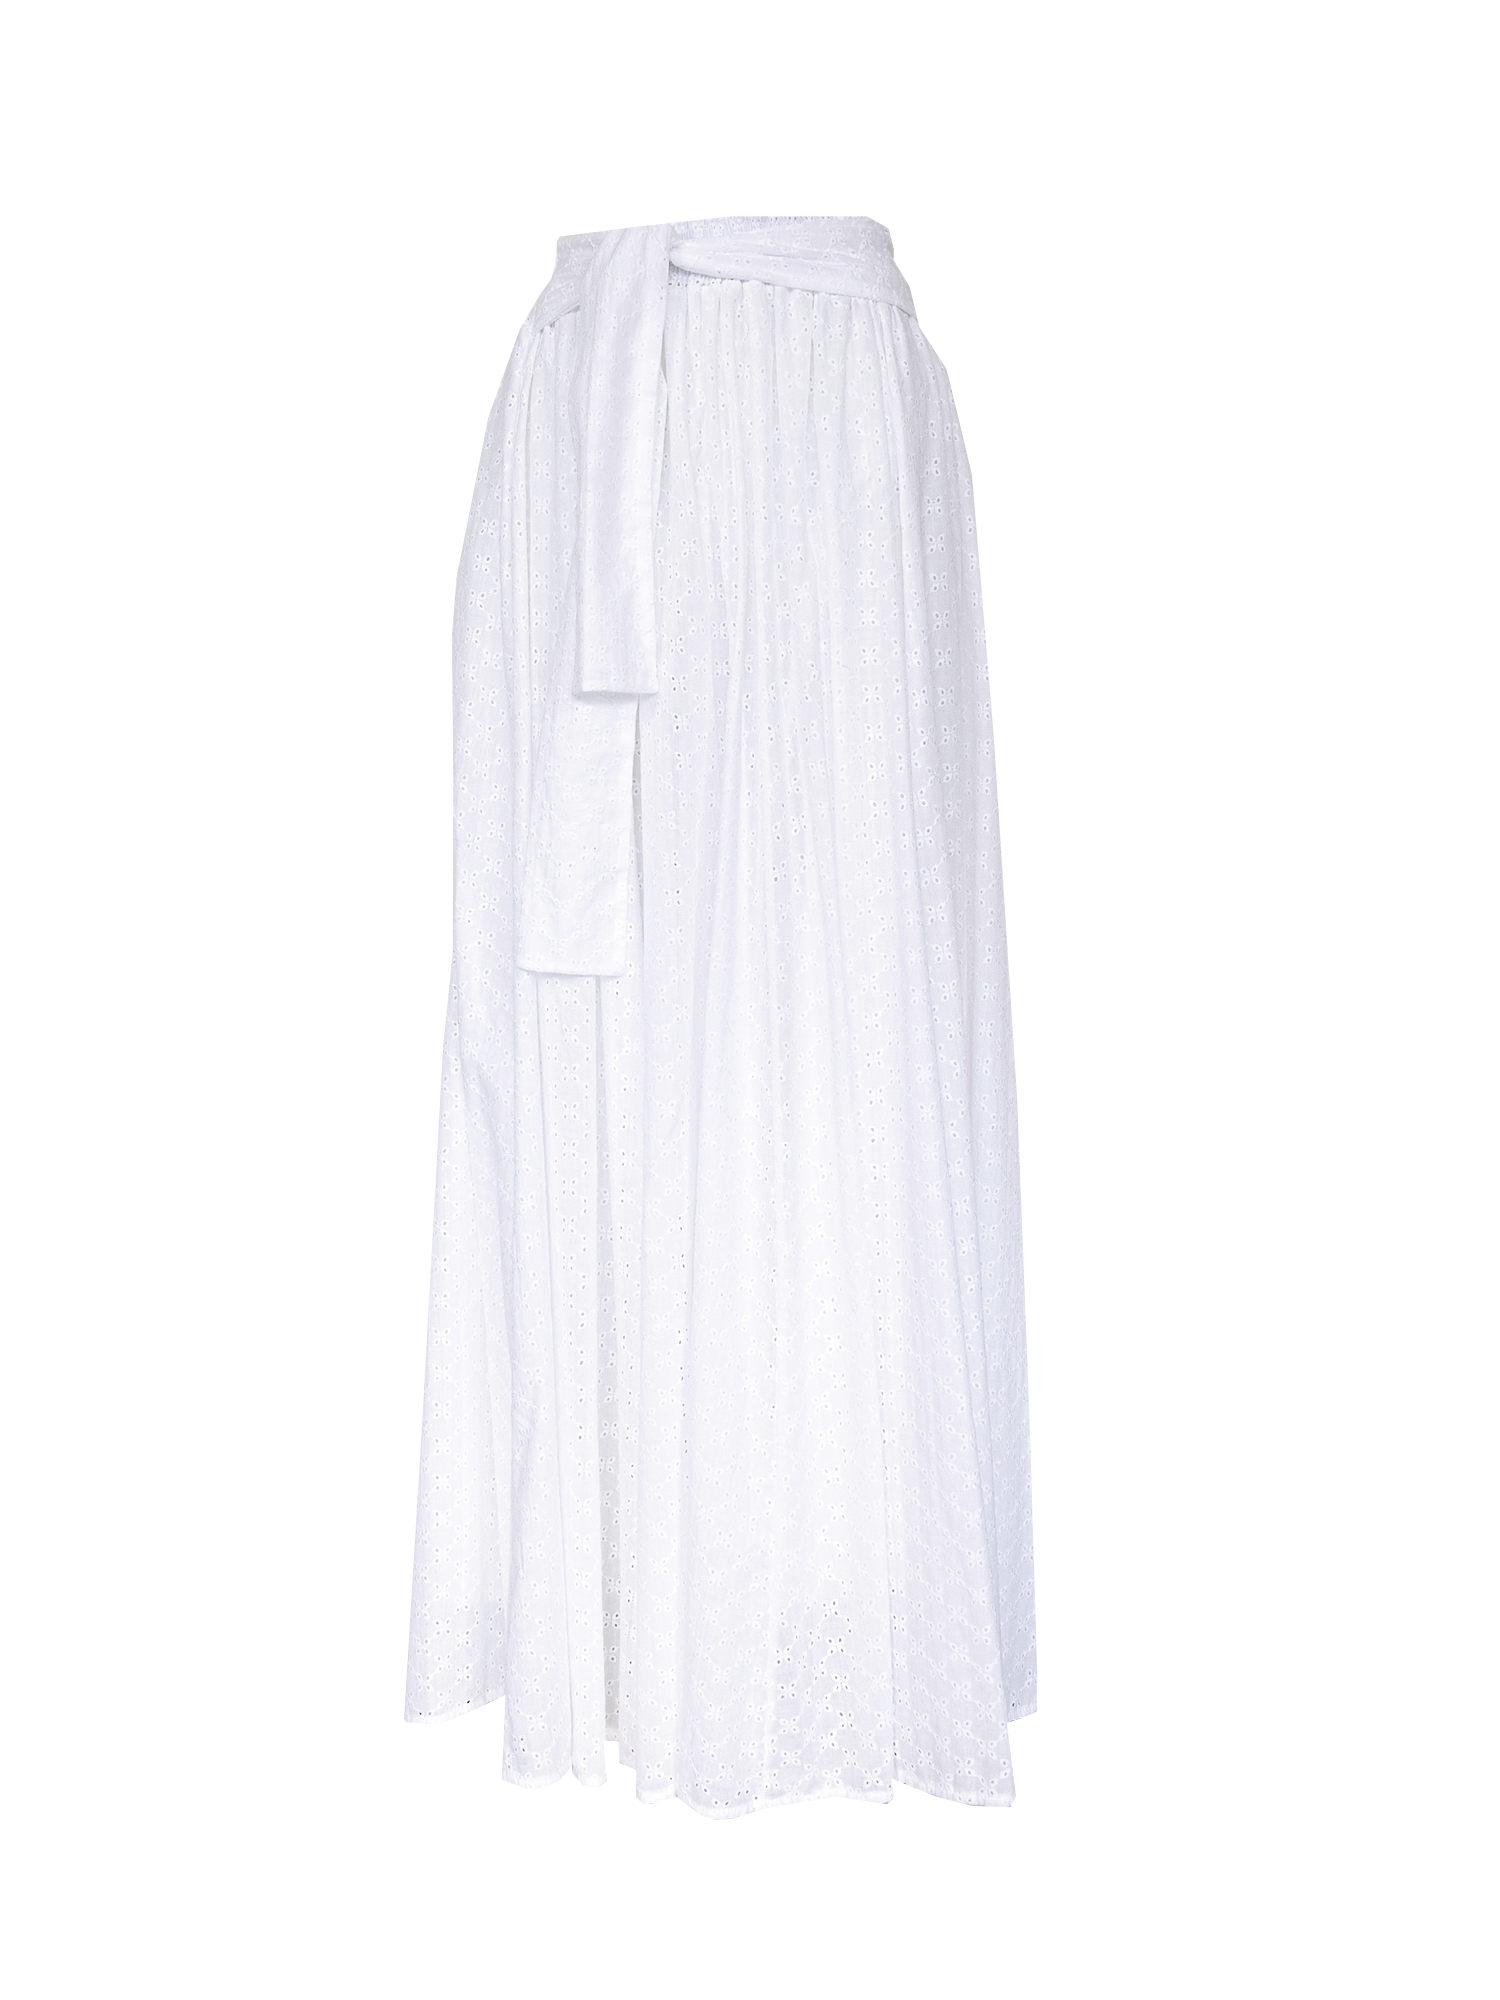 FIORDALISA - long and wide skirt with belt in cotton broderie anglaise